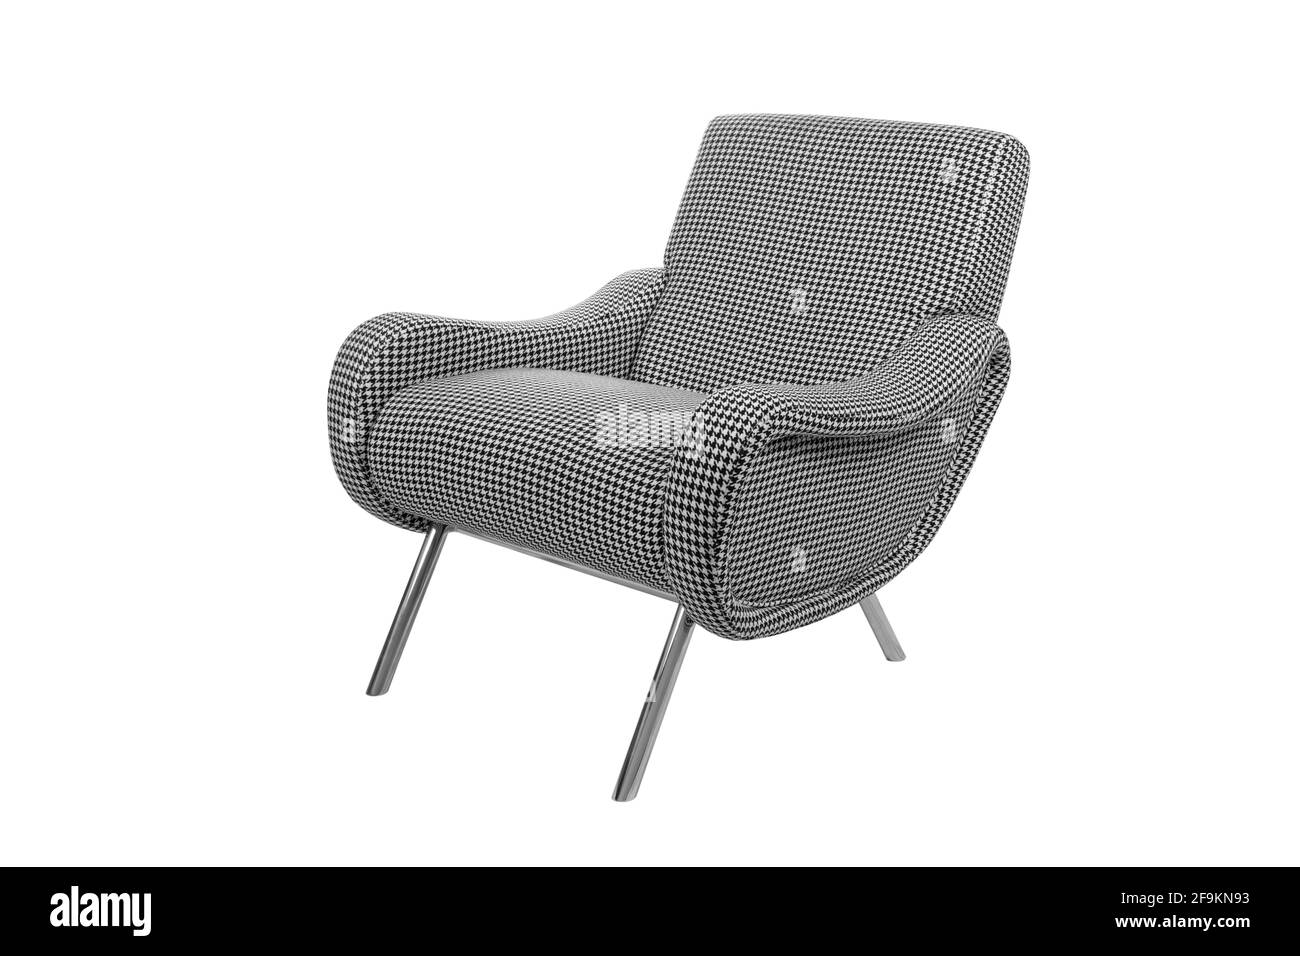 Black and white modern armchair isolated on white background Stock Photo